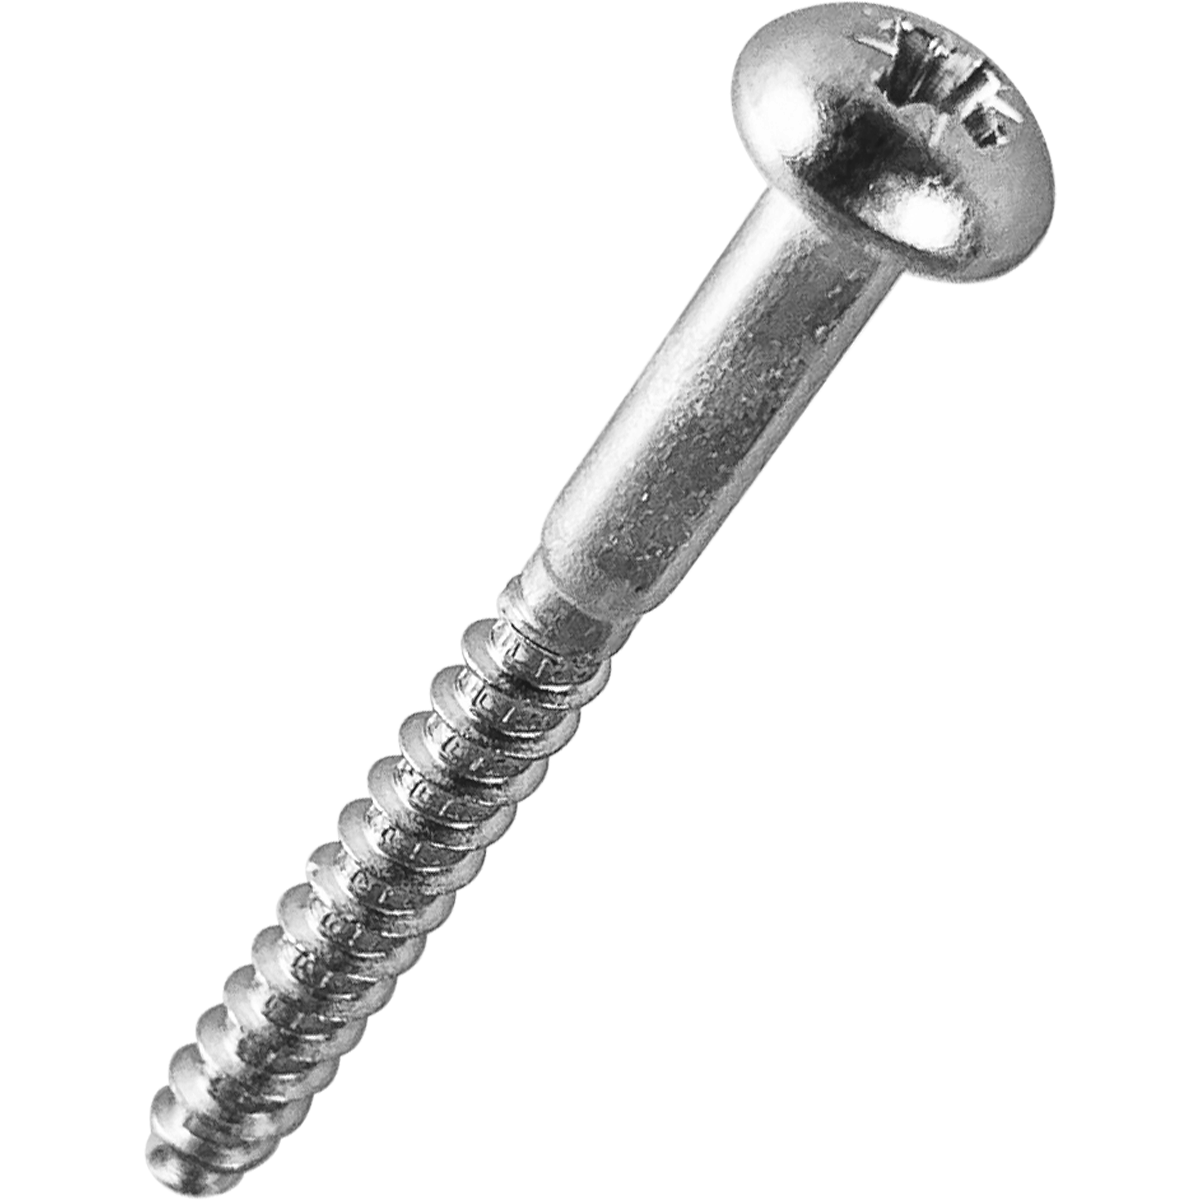 Pozi, round-head woodscrews, are manufactured in corrosion-resistant A2 stainless steel and available in a selection of diameters and lengths